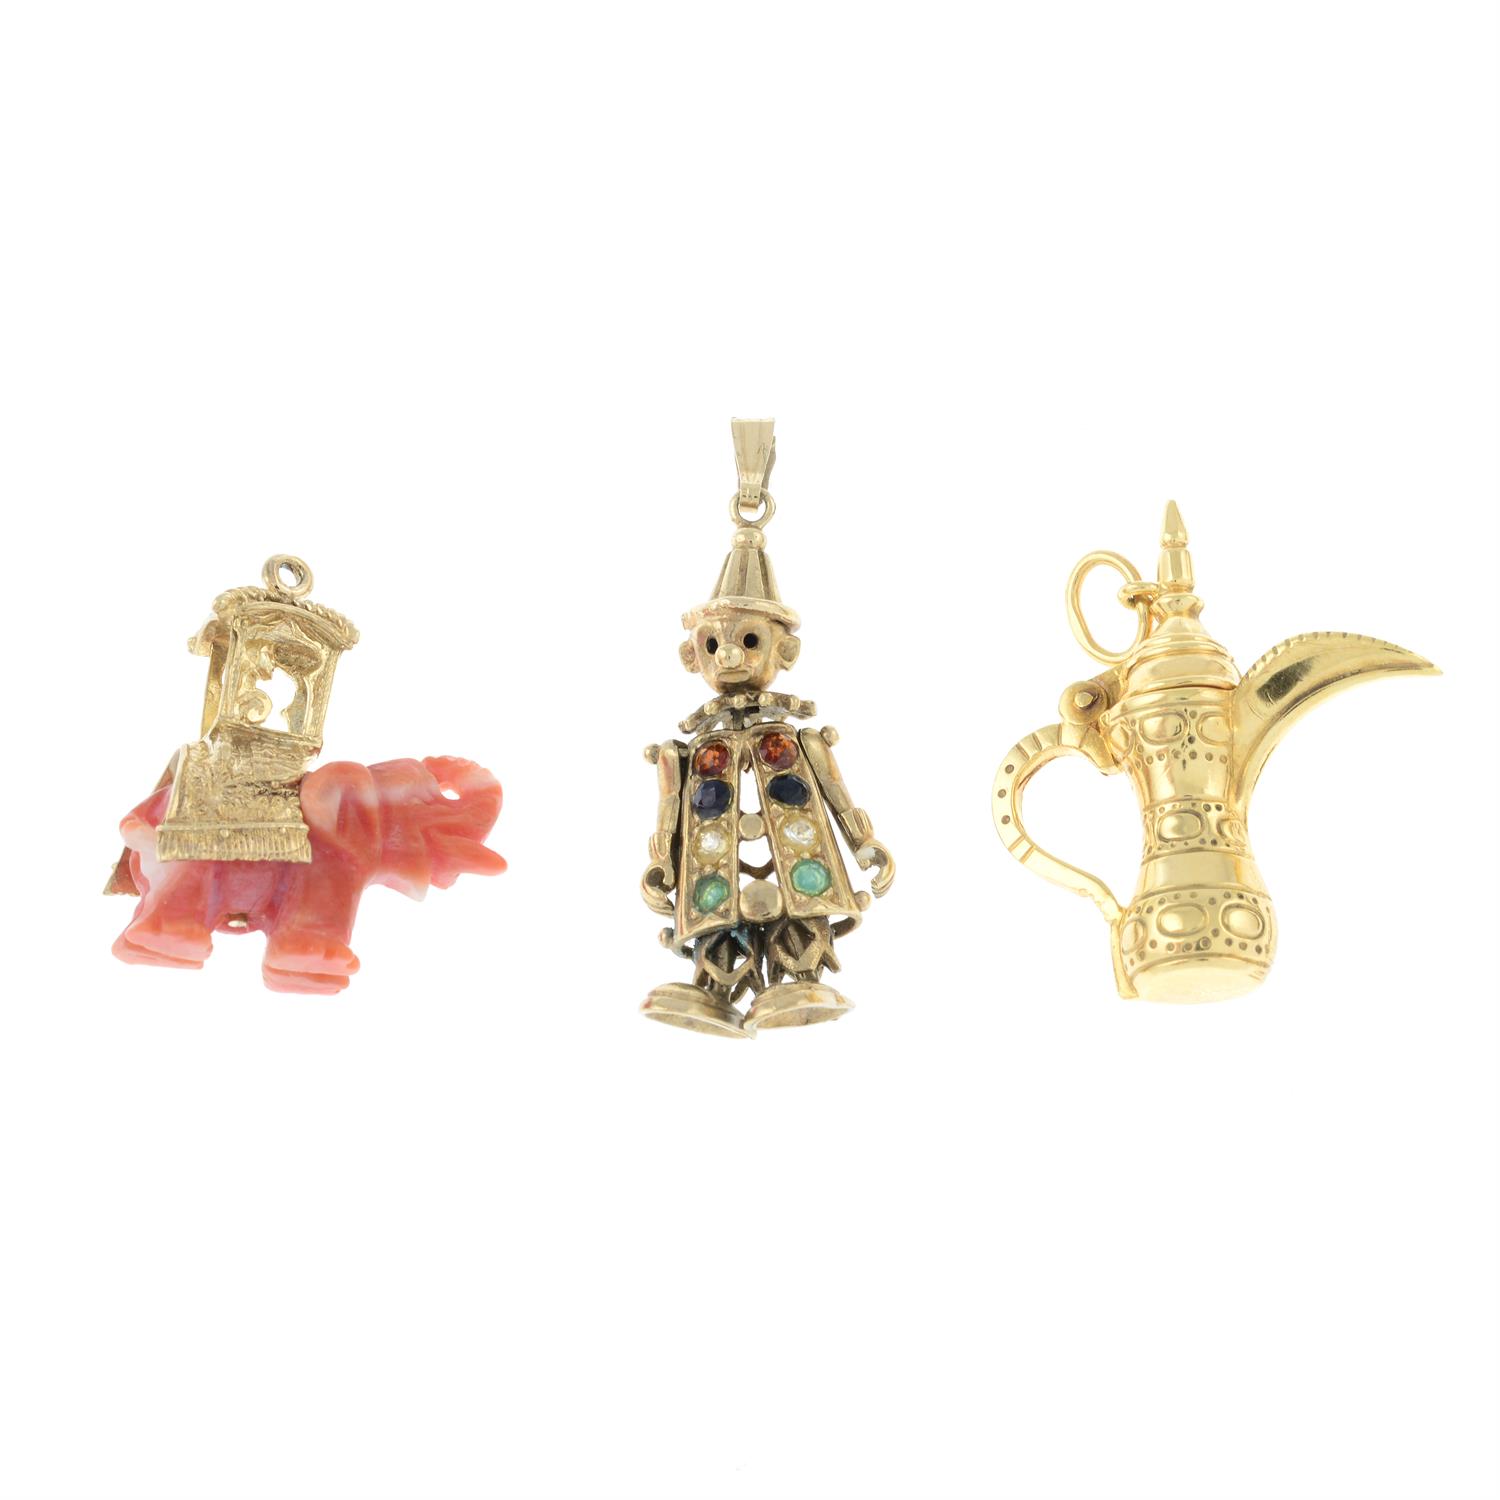 Two 9ct gold gem-set charms and a aftaba charm.